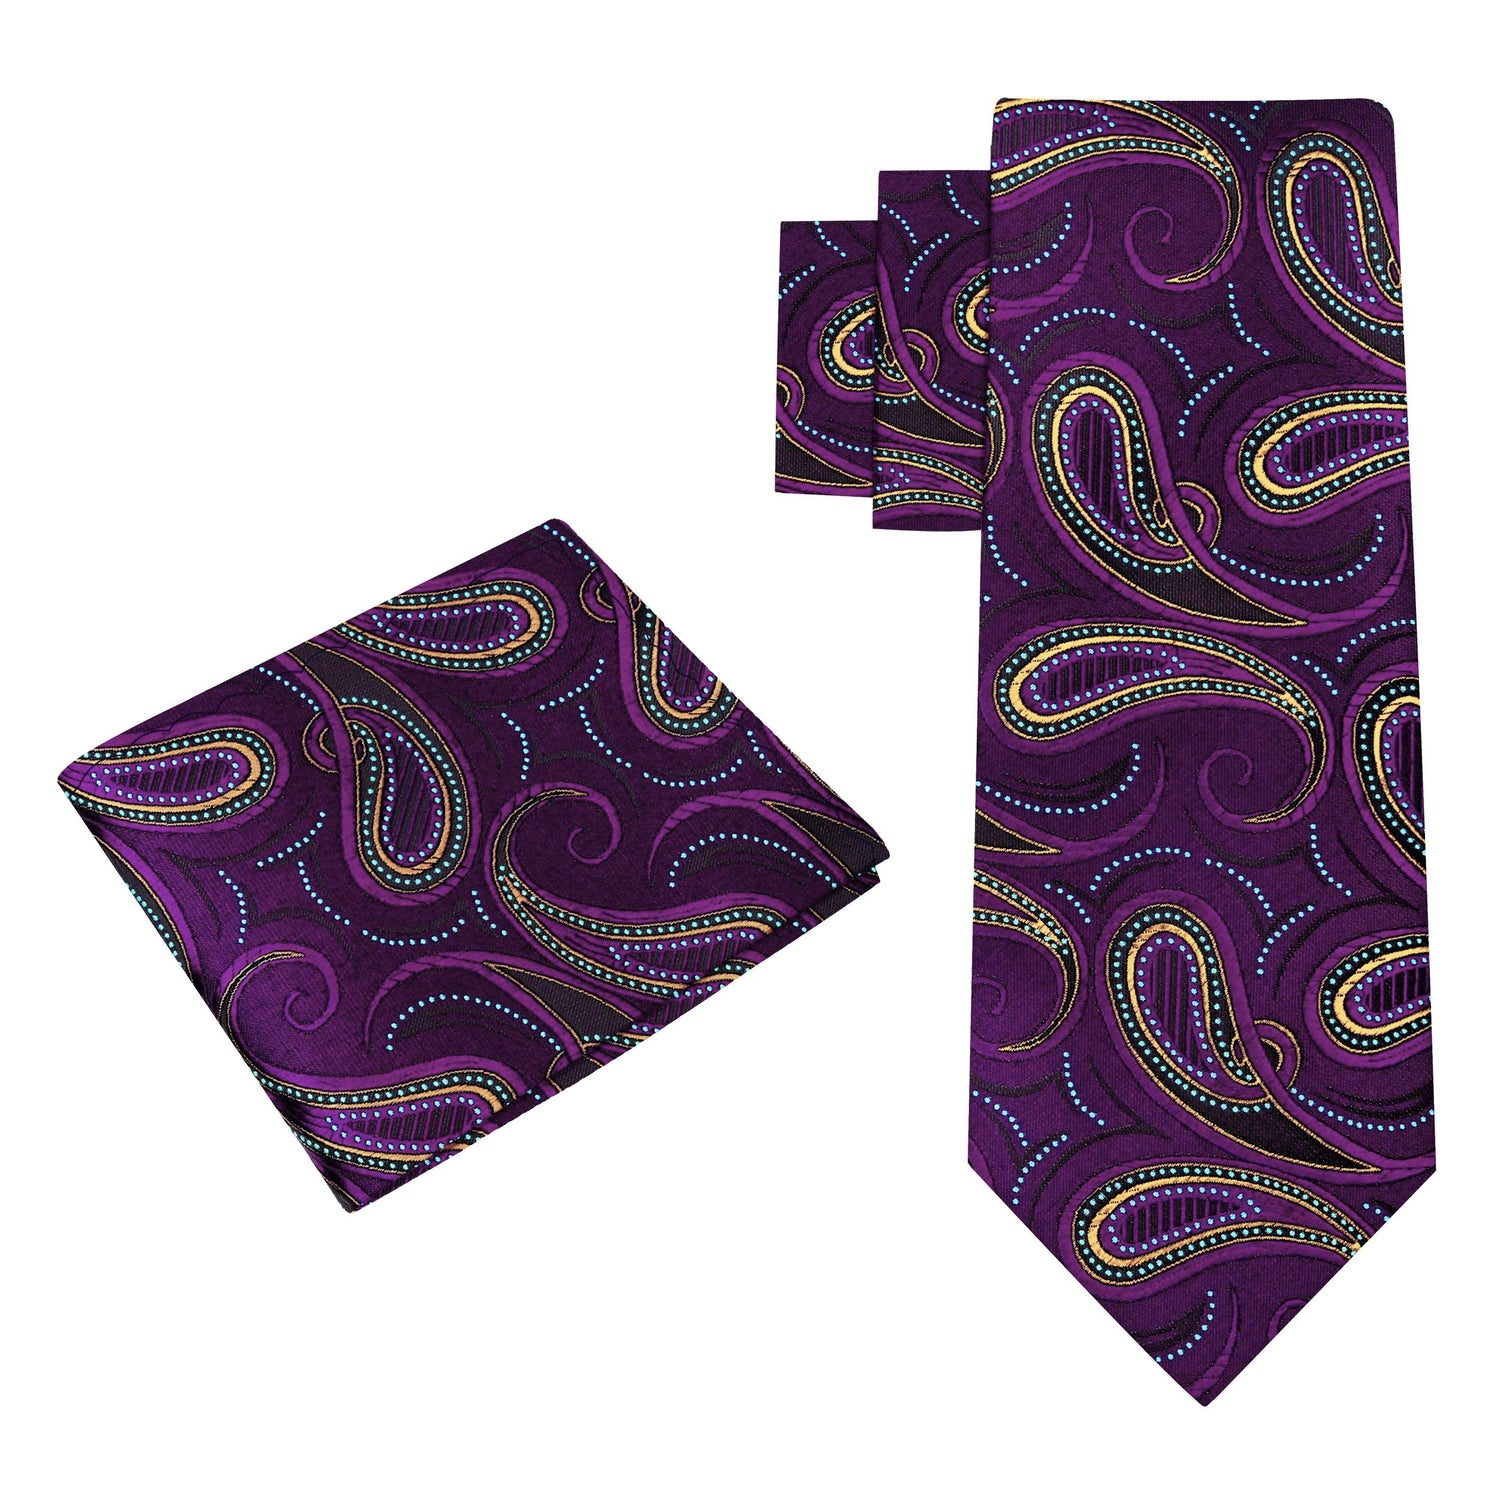 Alt View: Purple Paisley Necktie with Matching Pocket Square